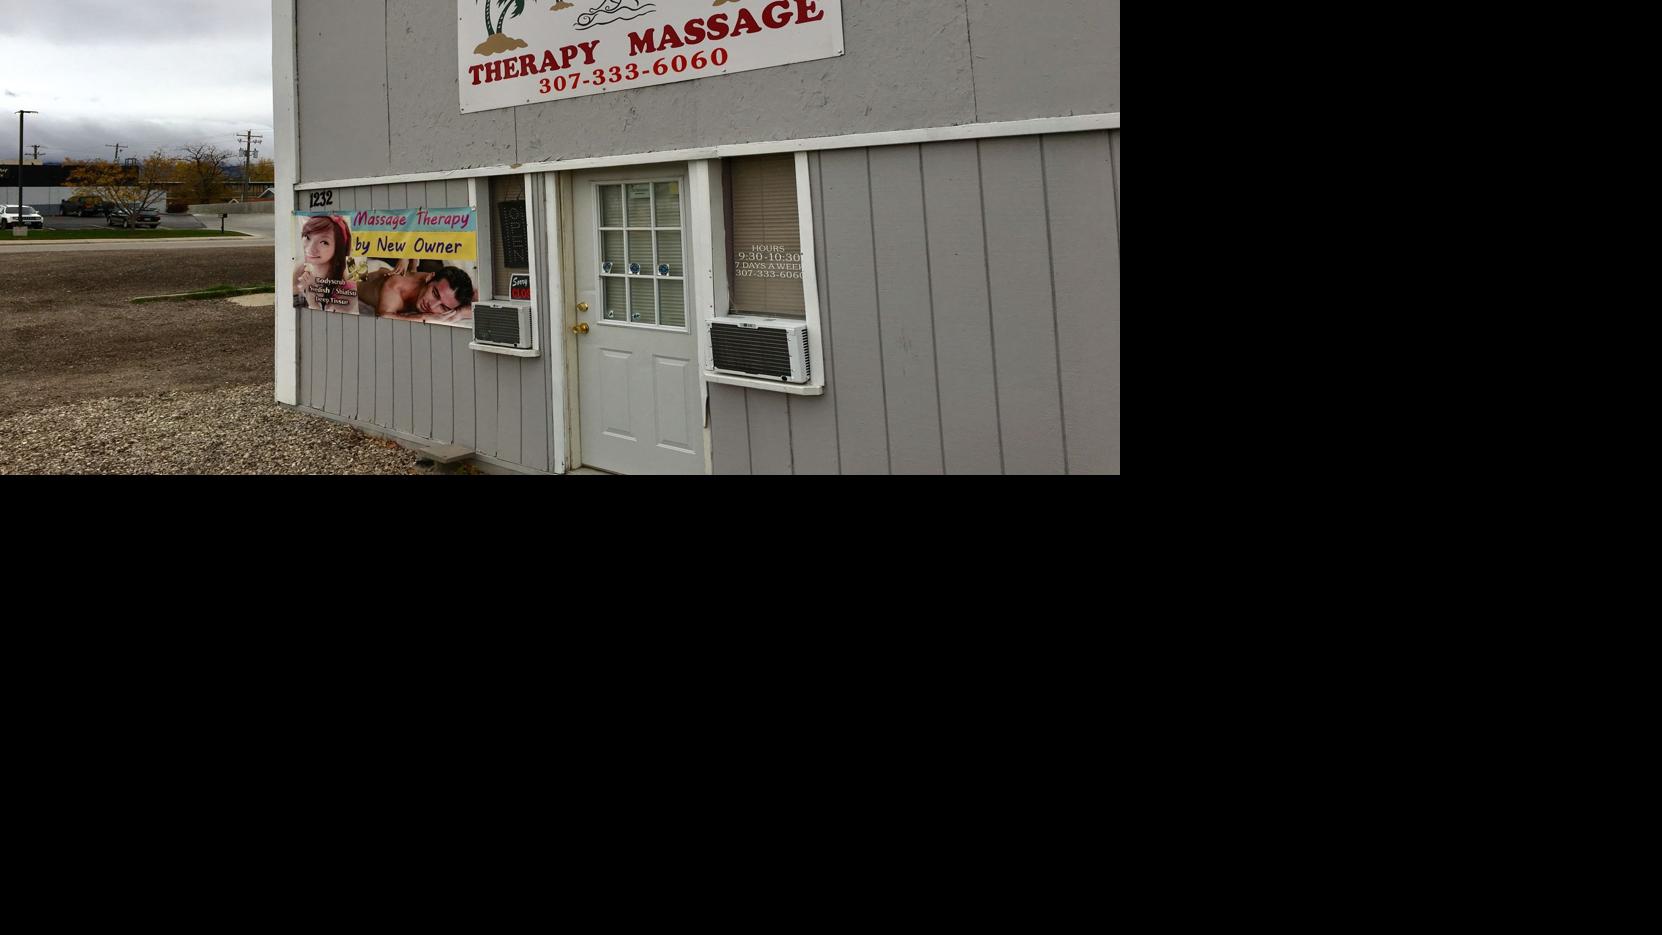 Police Arrest 3 In Prostitution Sting At Casper Massage Parlor Cops And Courts 